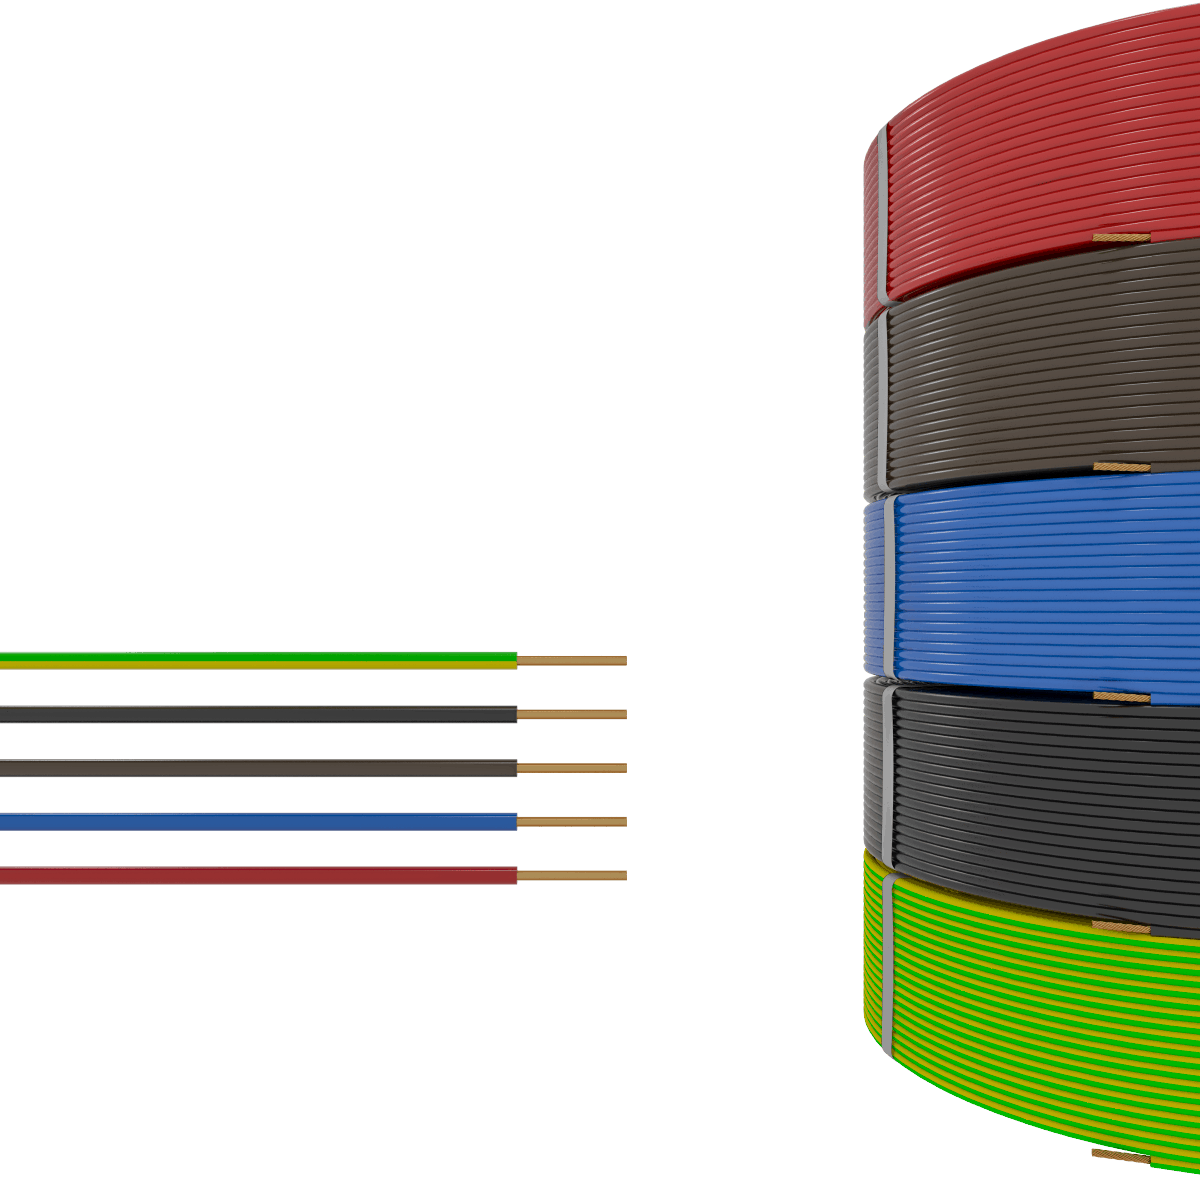 2,5 mm² Insulated Cables